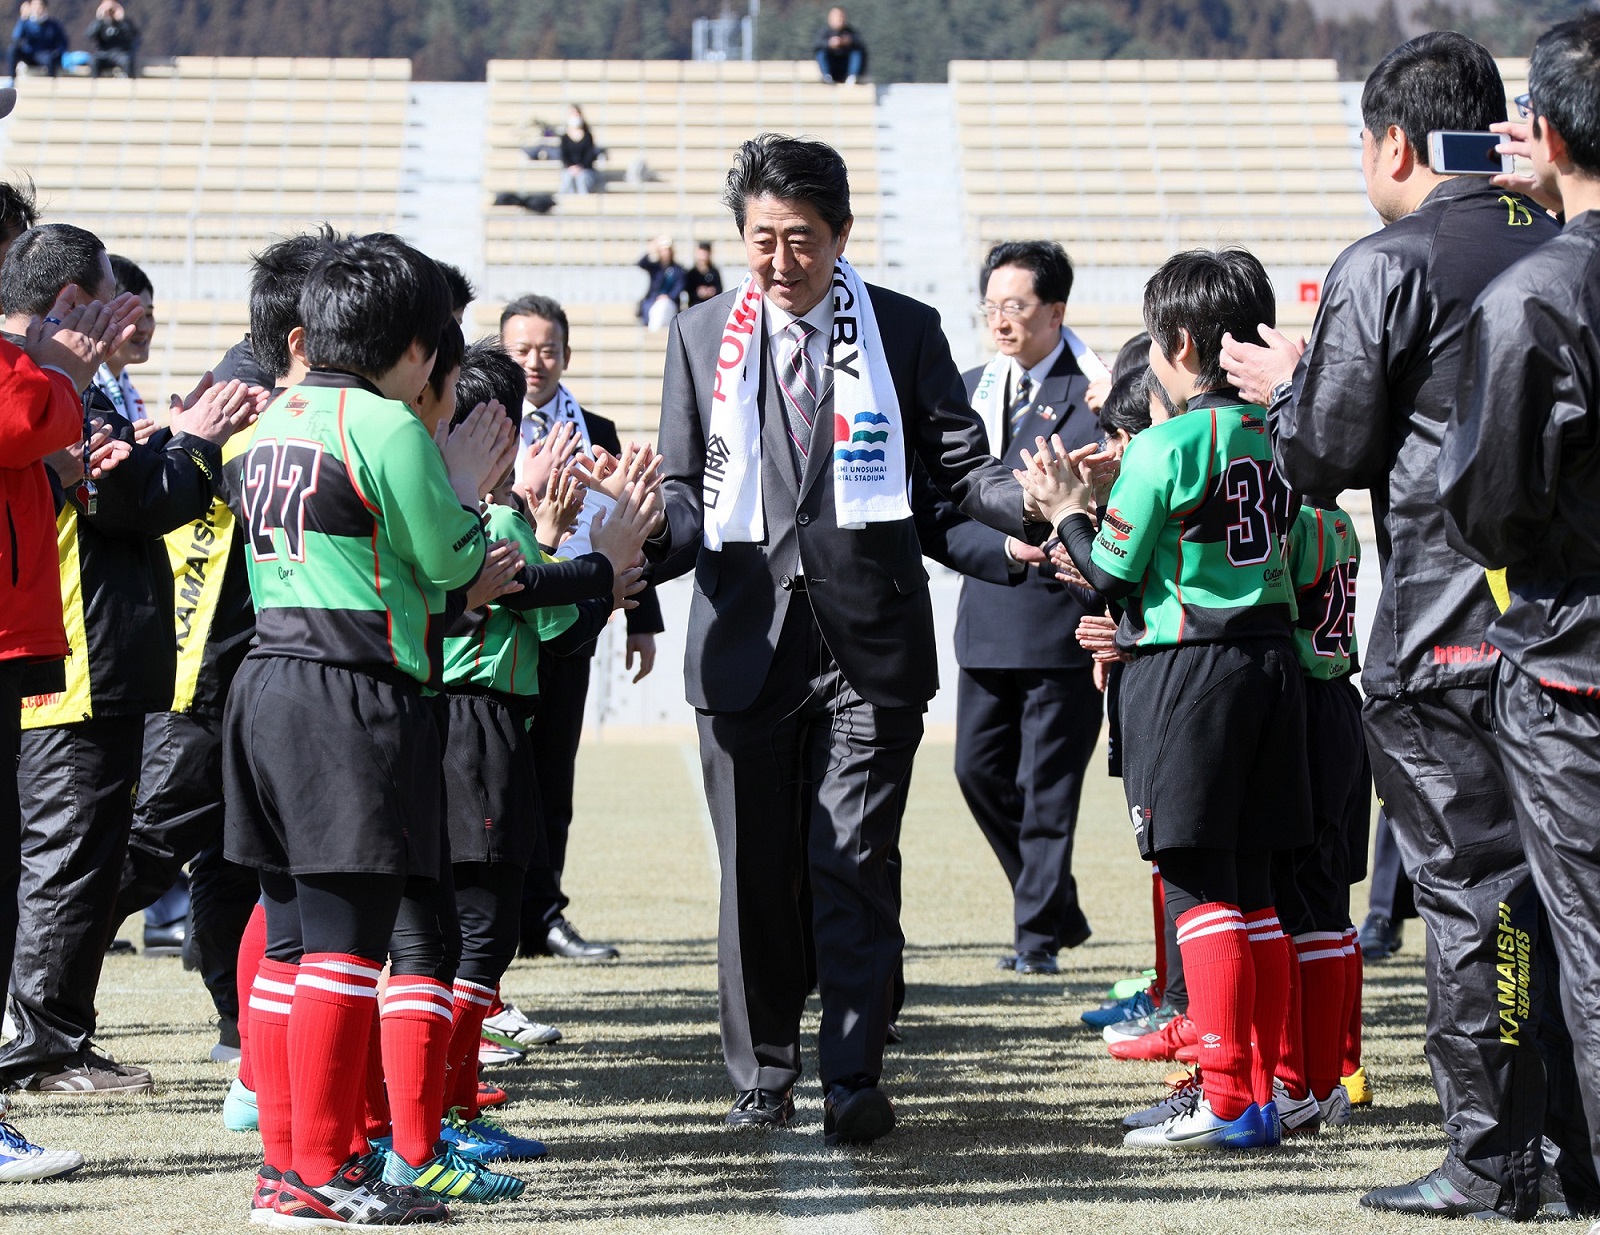 Photograph of the Prime Minister observing children practicing rugby